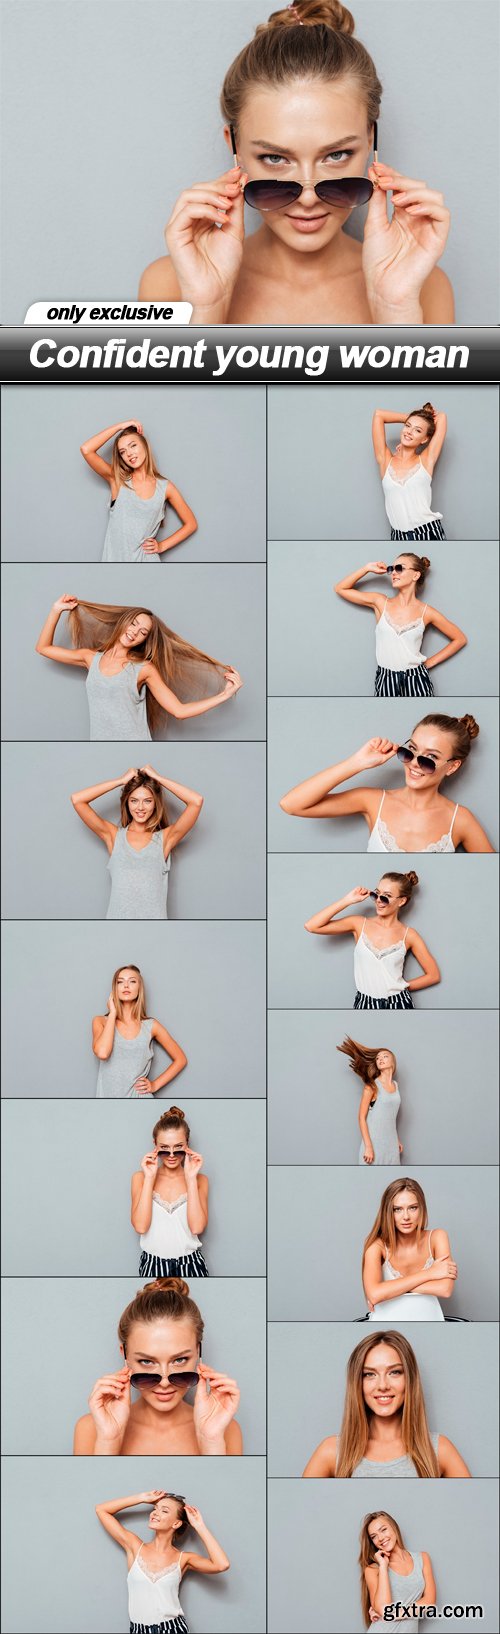 Confident young woman - 15 UHQ JPEG